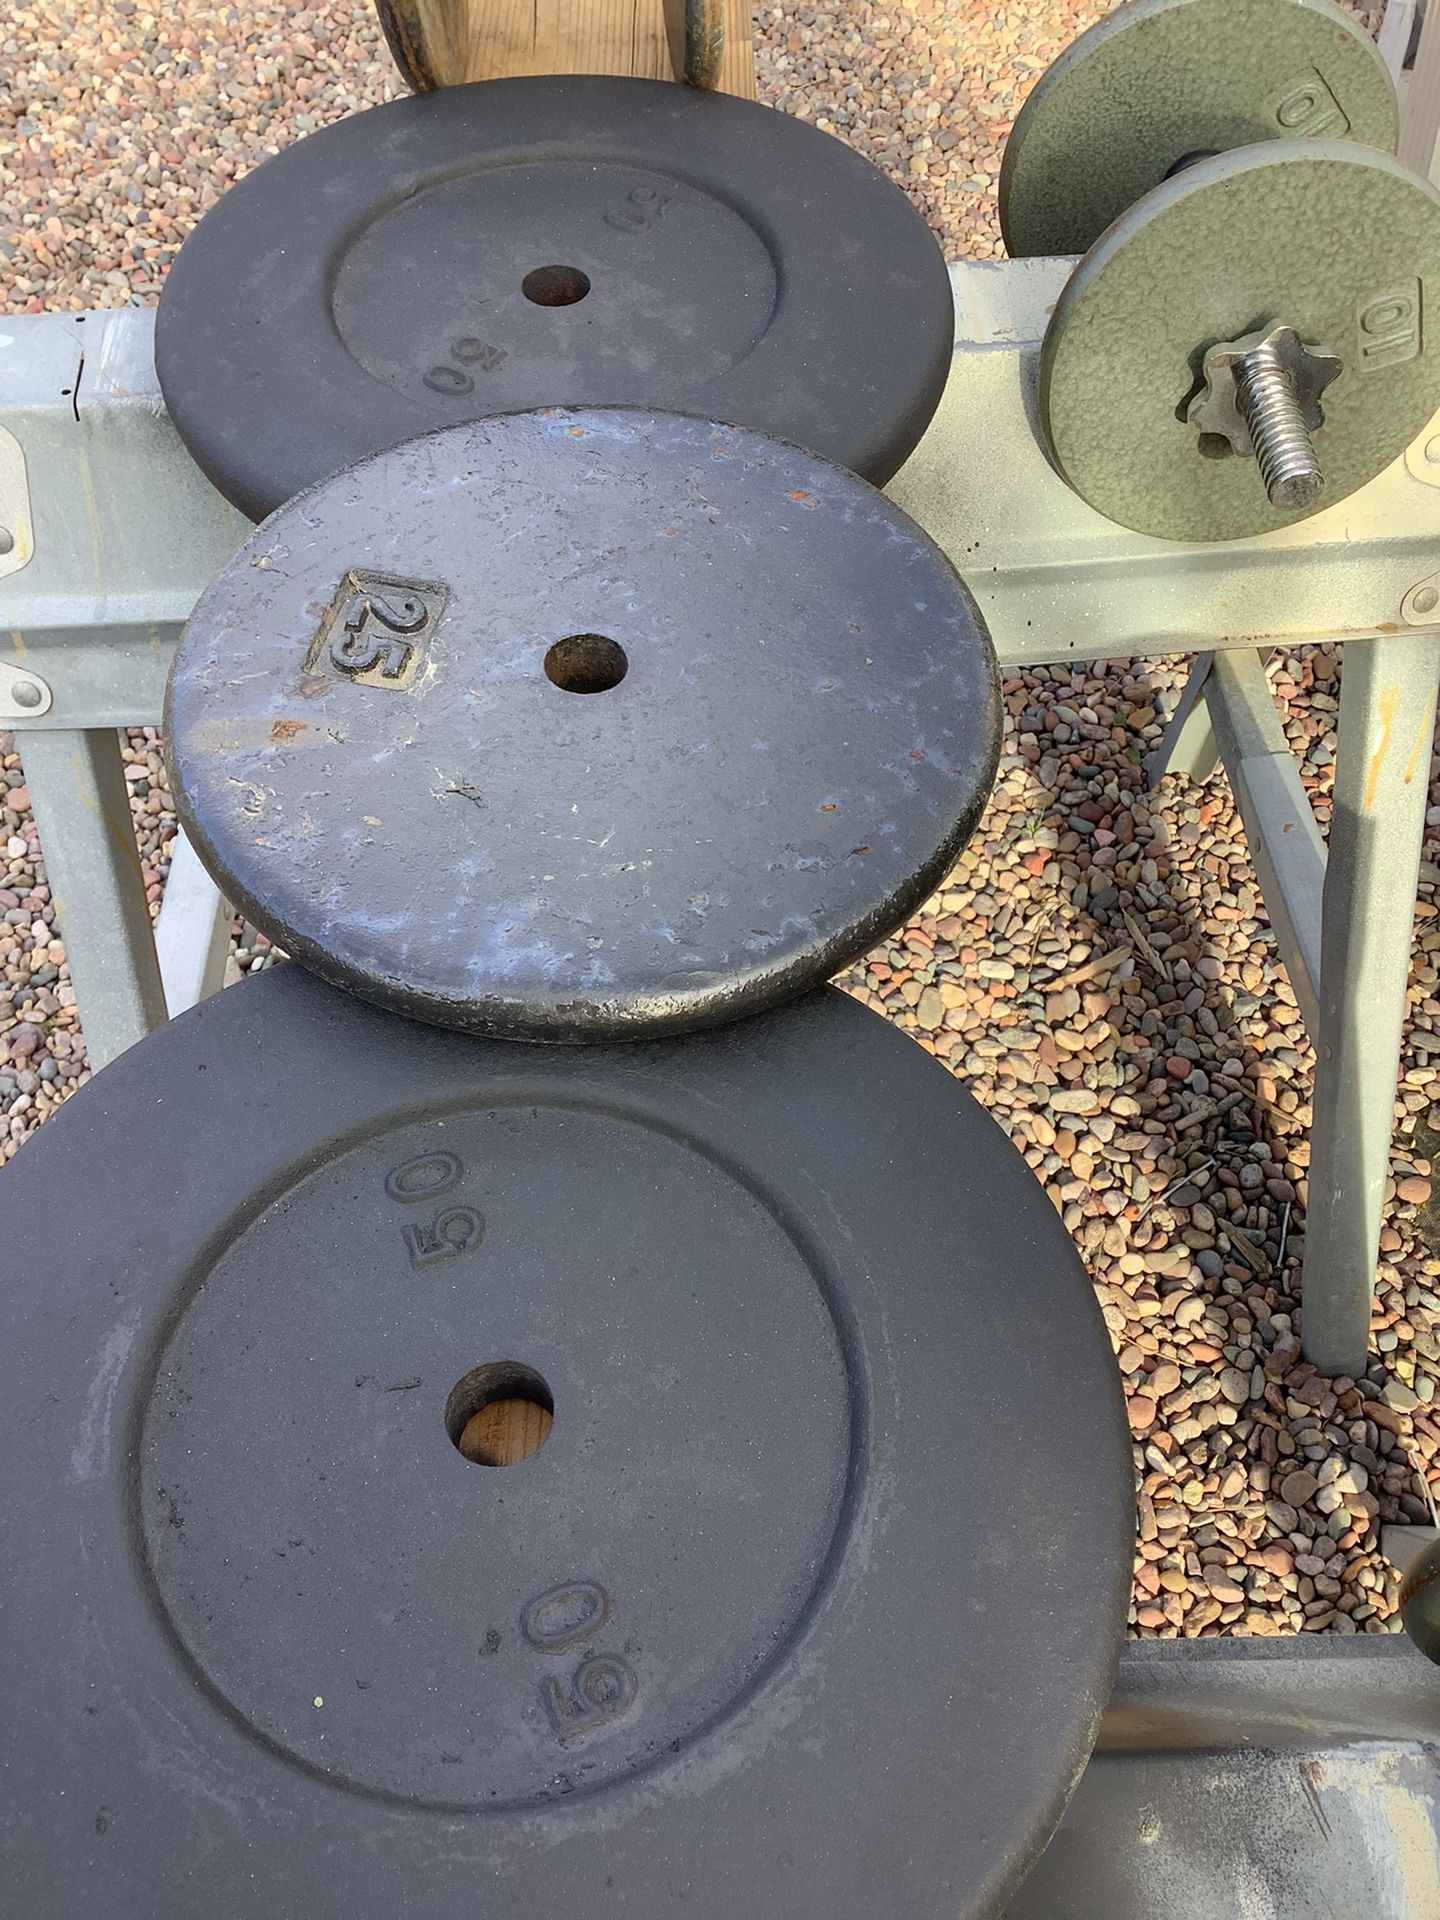 170+ POUNDS OF STEEL WEIGHTS ,,ONLY $ 130.  INCLUDING 4 INTERLOCKING MATS.  